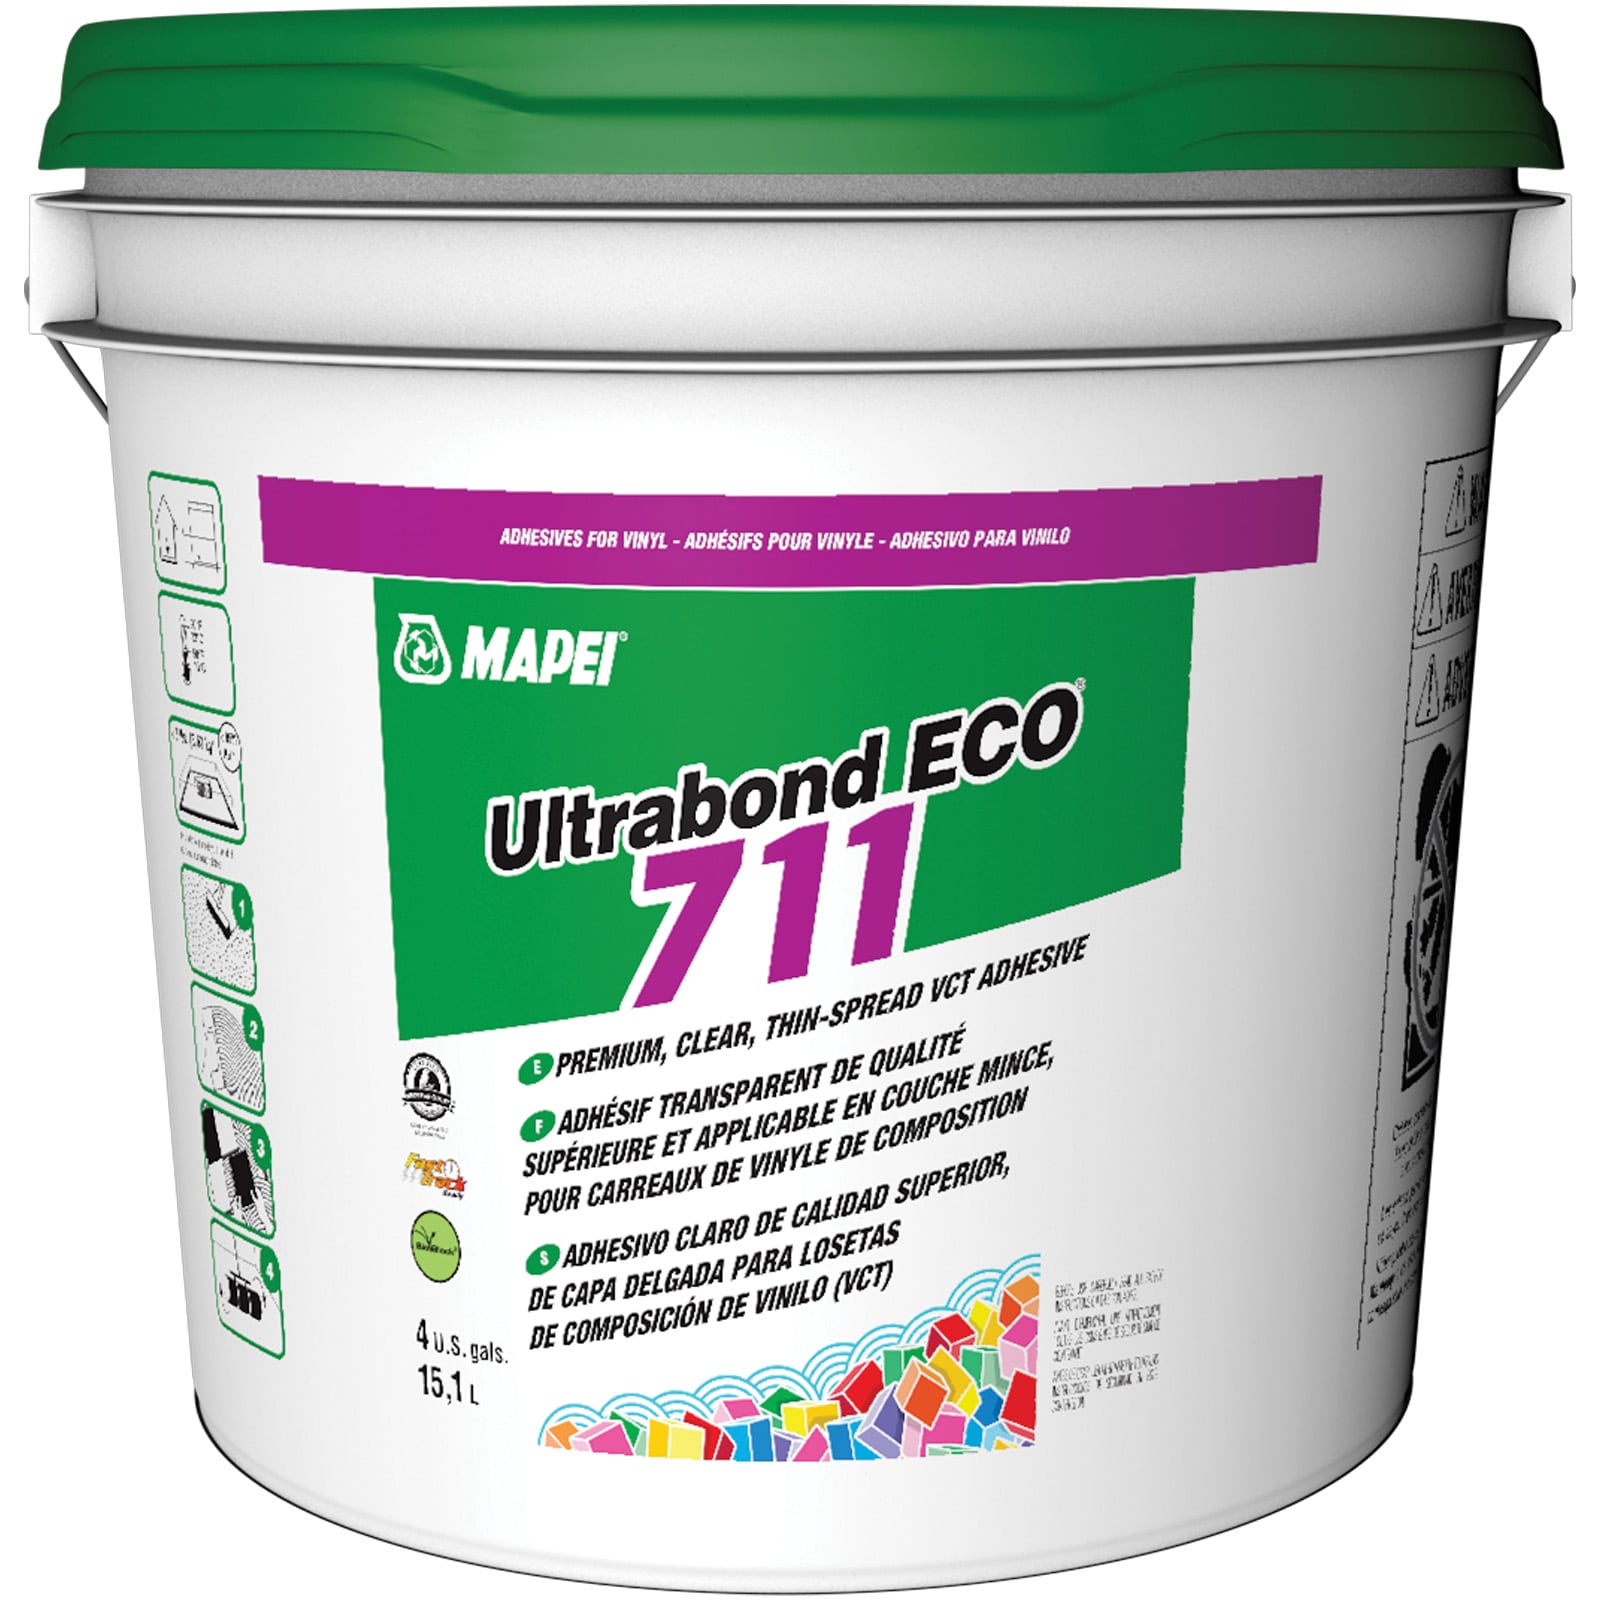 MAPEI Ultrabond ECO 711 Vct Flooring Adhesive (4-Gallons in the